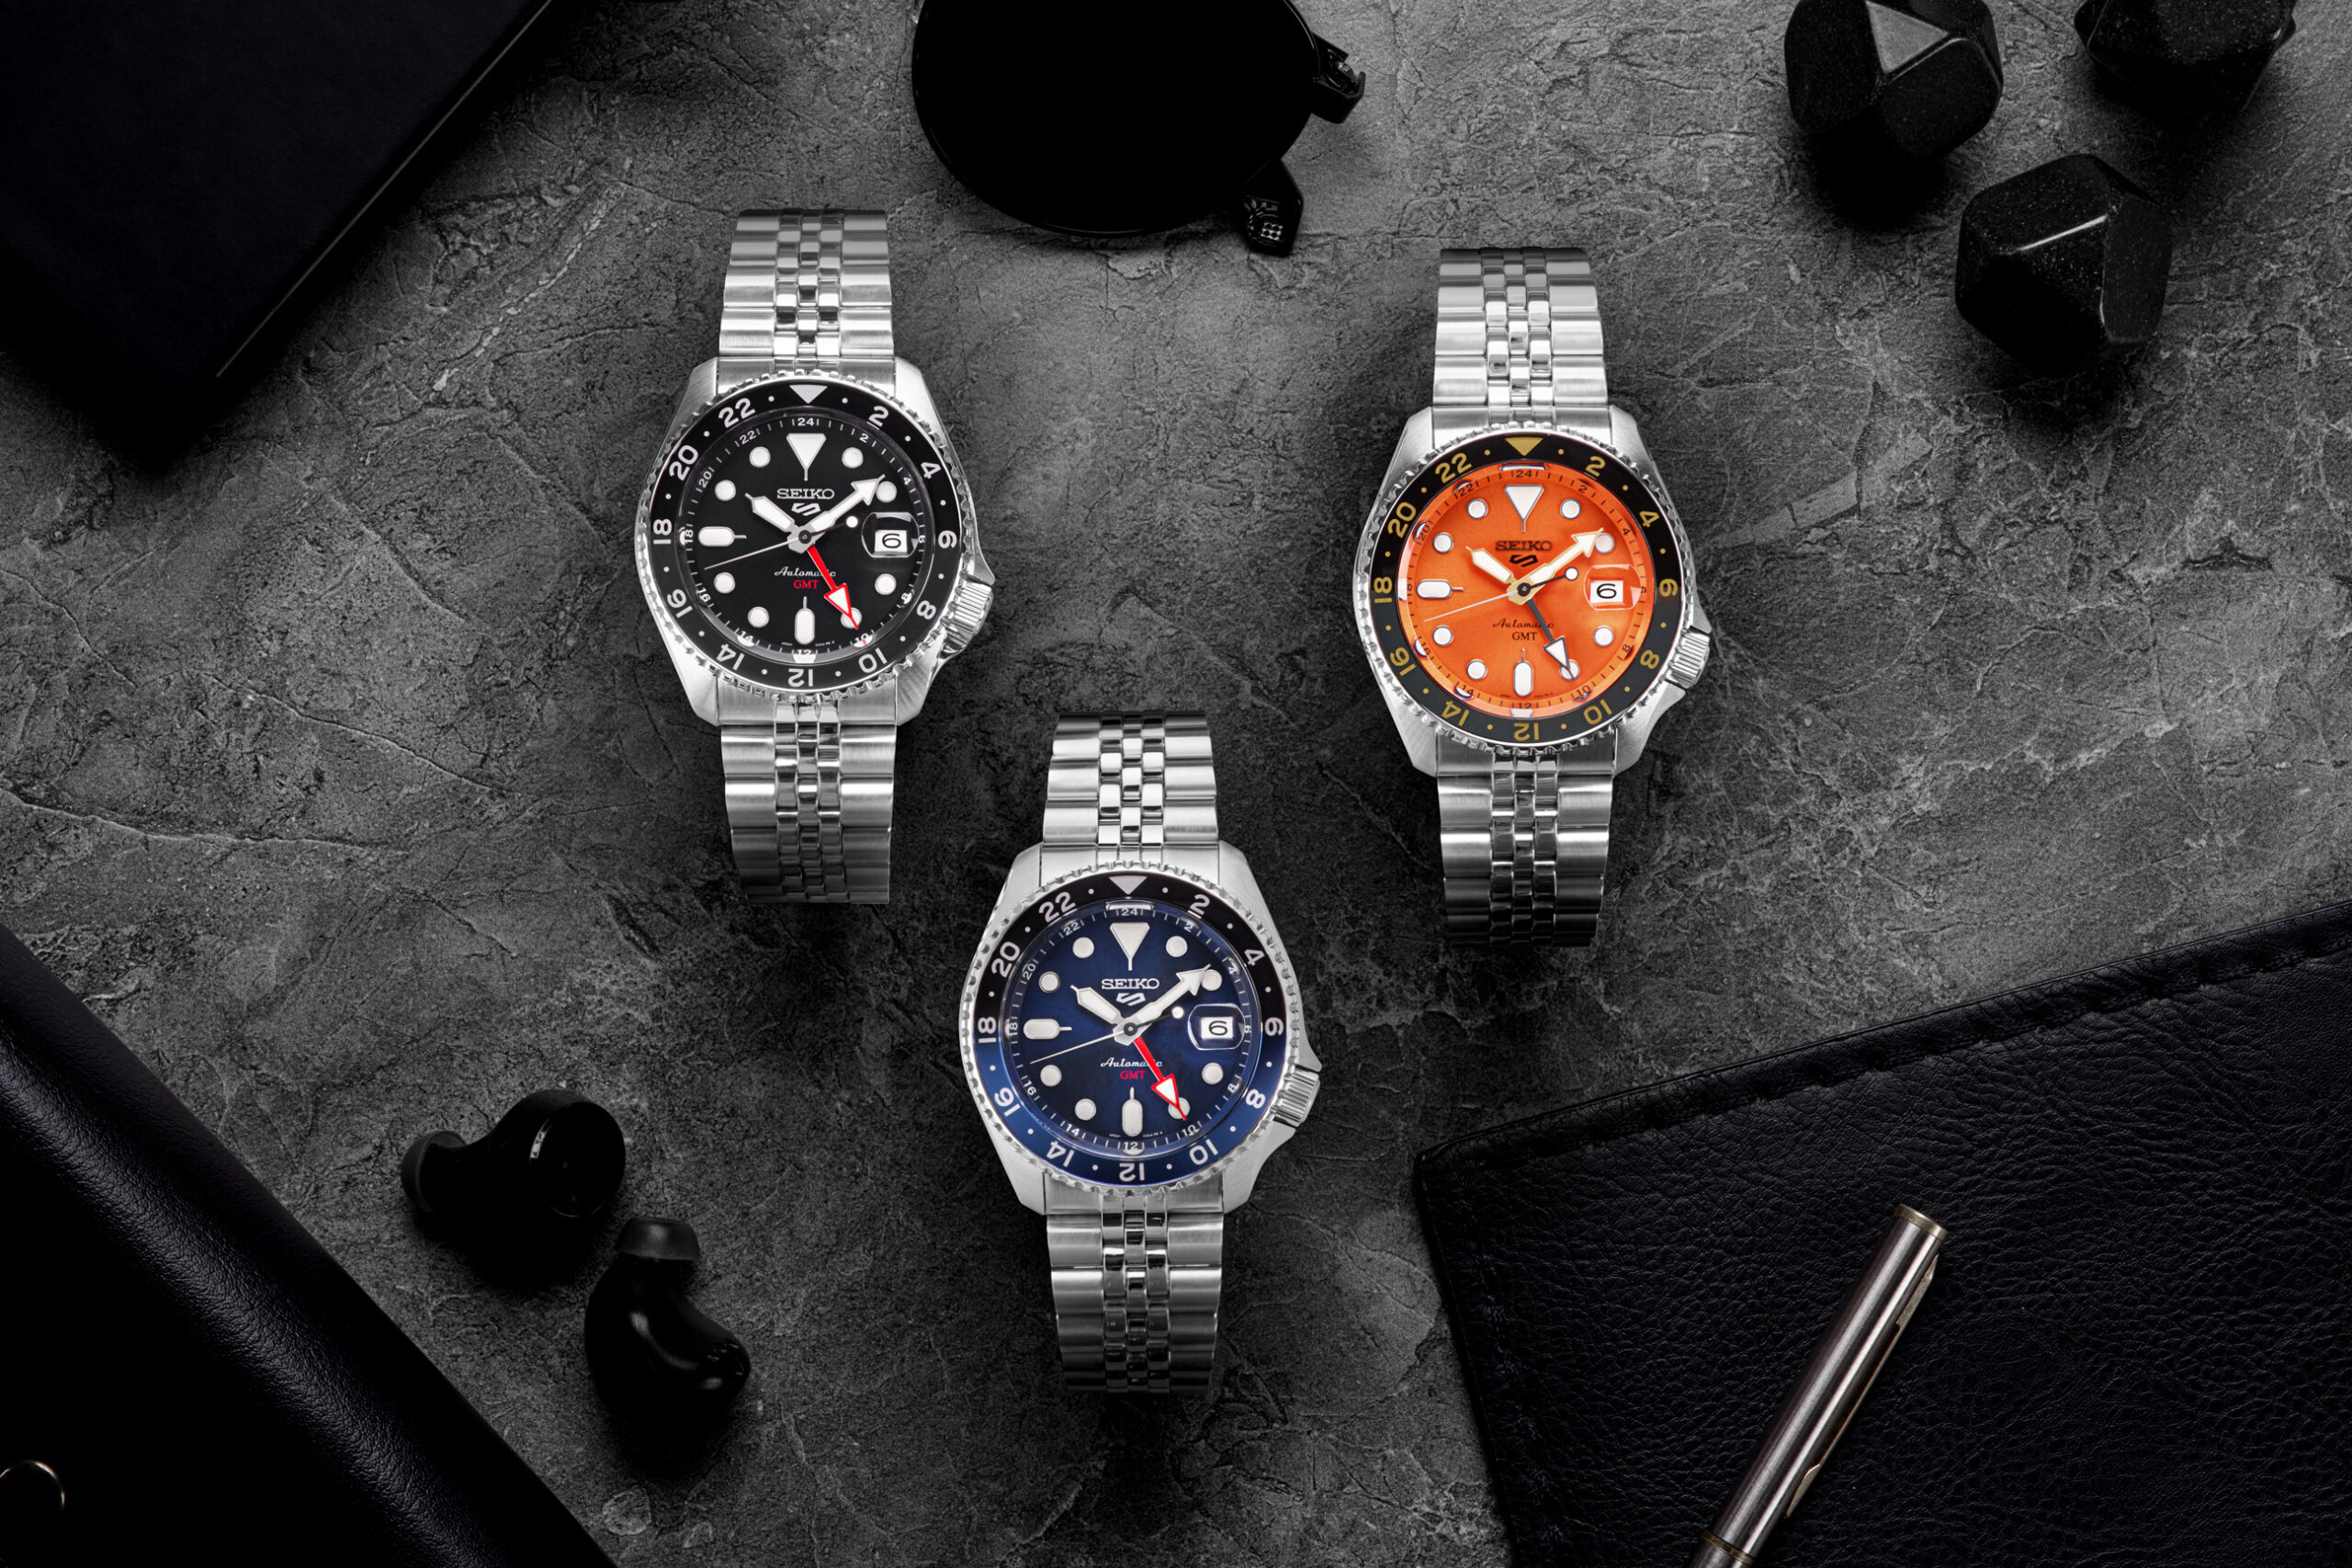 Win it: The Seiko 5 Sports GMT Automatic Watch